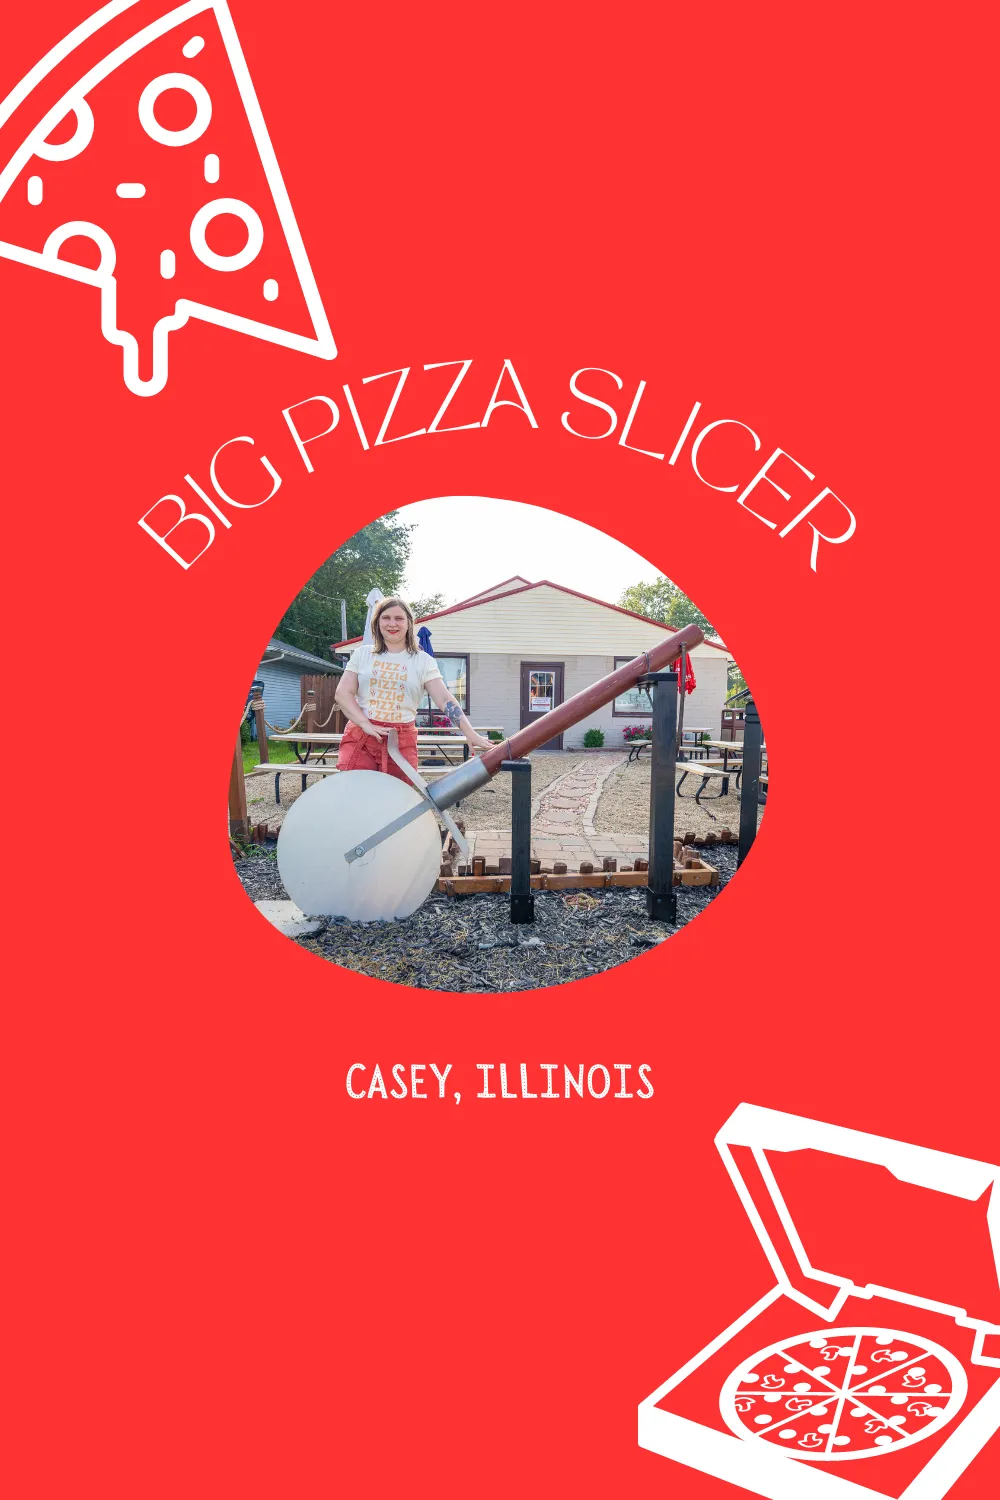 This roadside attraction takes a pizza my heart. It’s the big pizza slicer at Greathouse of Pizza in Casey, Illinois.Casey, Illinois is a small town known for its big things. The town is home over thirty roadside attractions, including twelve record holding world's largest things! #IllinoisRoadsideAttractions #IllinoisRoadsideAttraction #RoadsideAttractions #RoadsideAttraction #RoadTrip #IllinoisRoadTrip #IllinoisWeekendGetaways #IllinoisWithKids #IllinoisRoadTripTravel